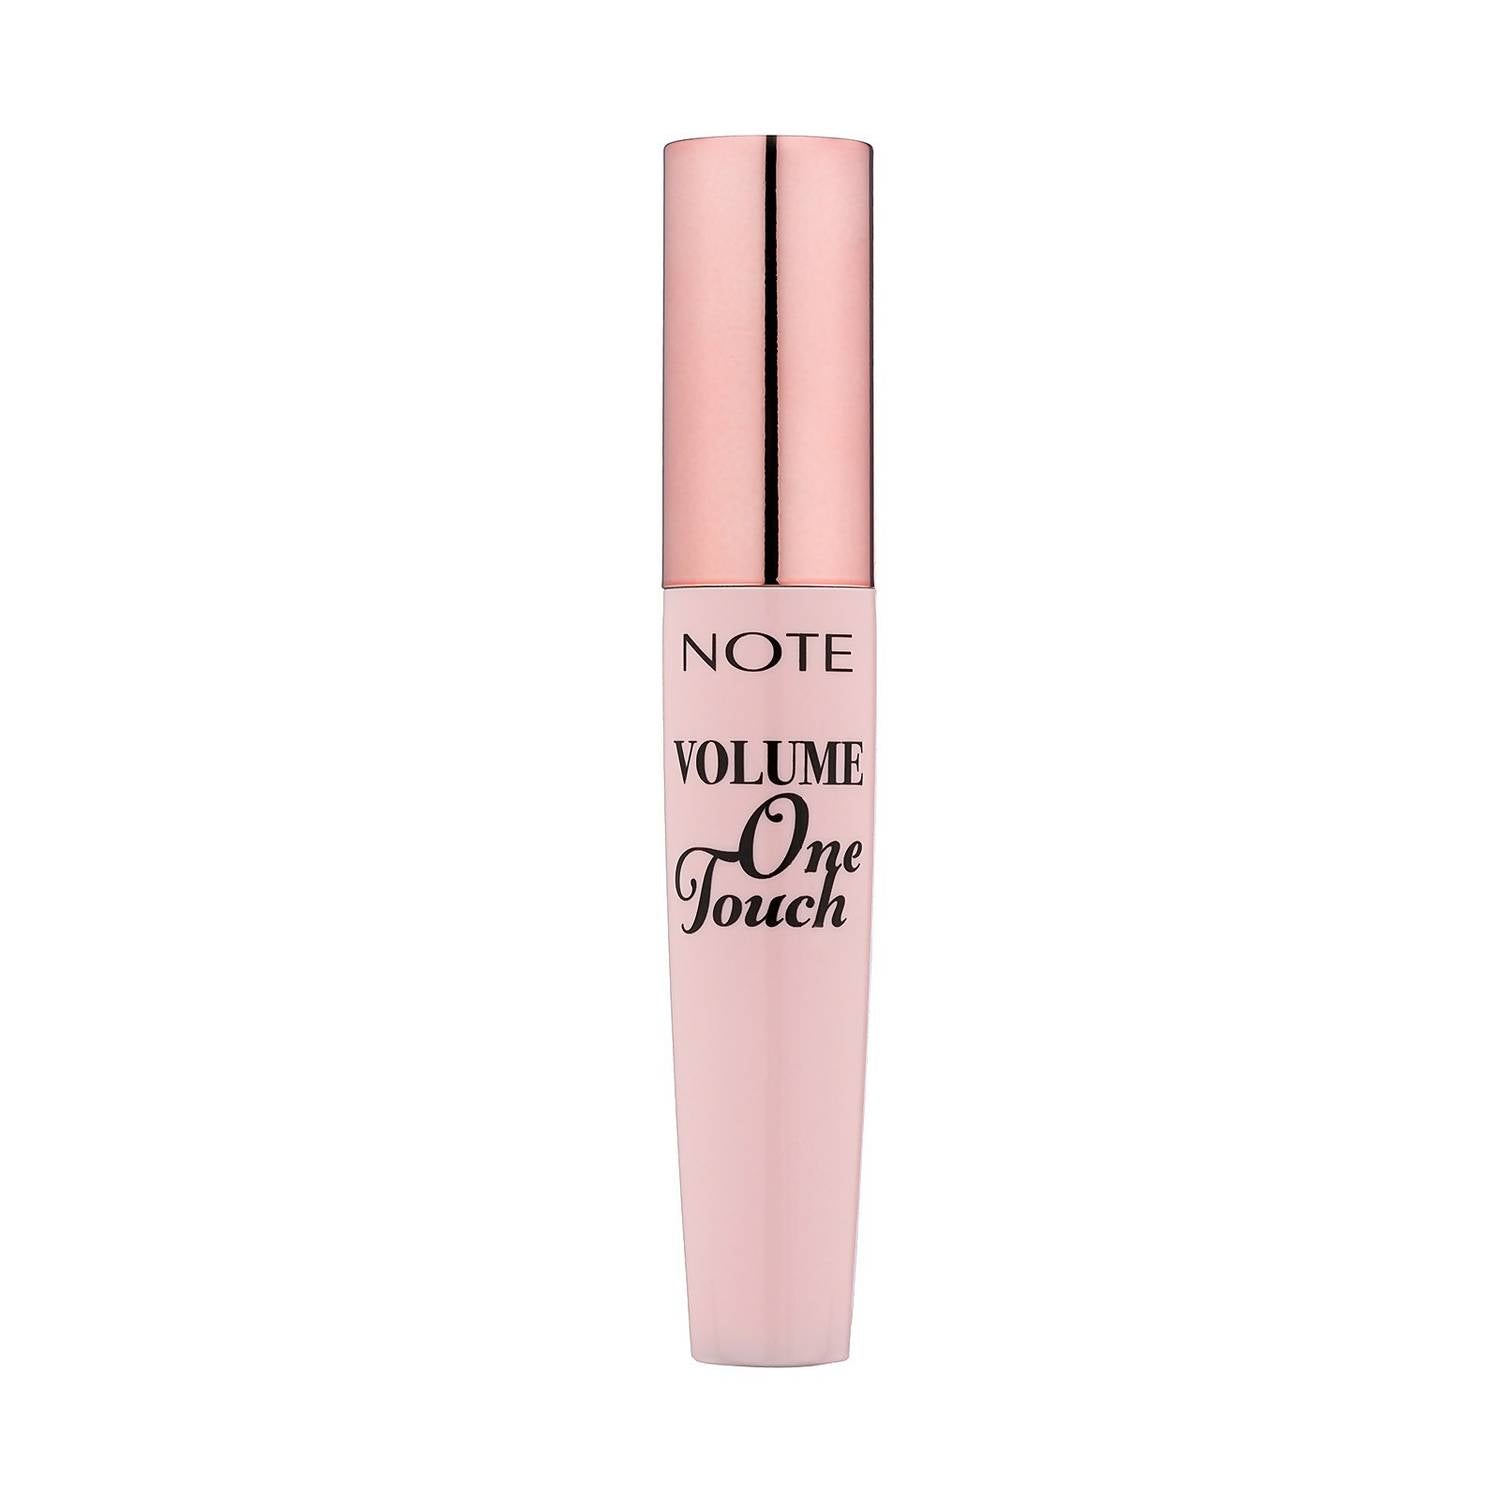 Note Volume One Touch Mascara - Give Us Beauty